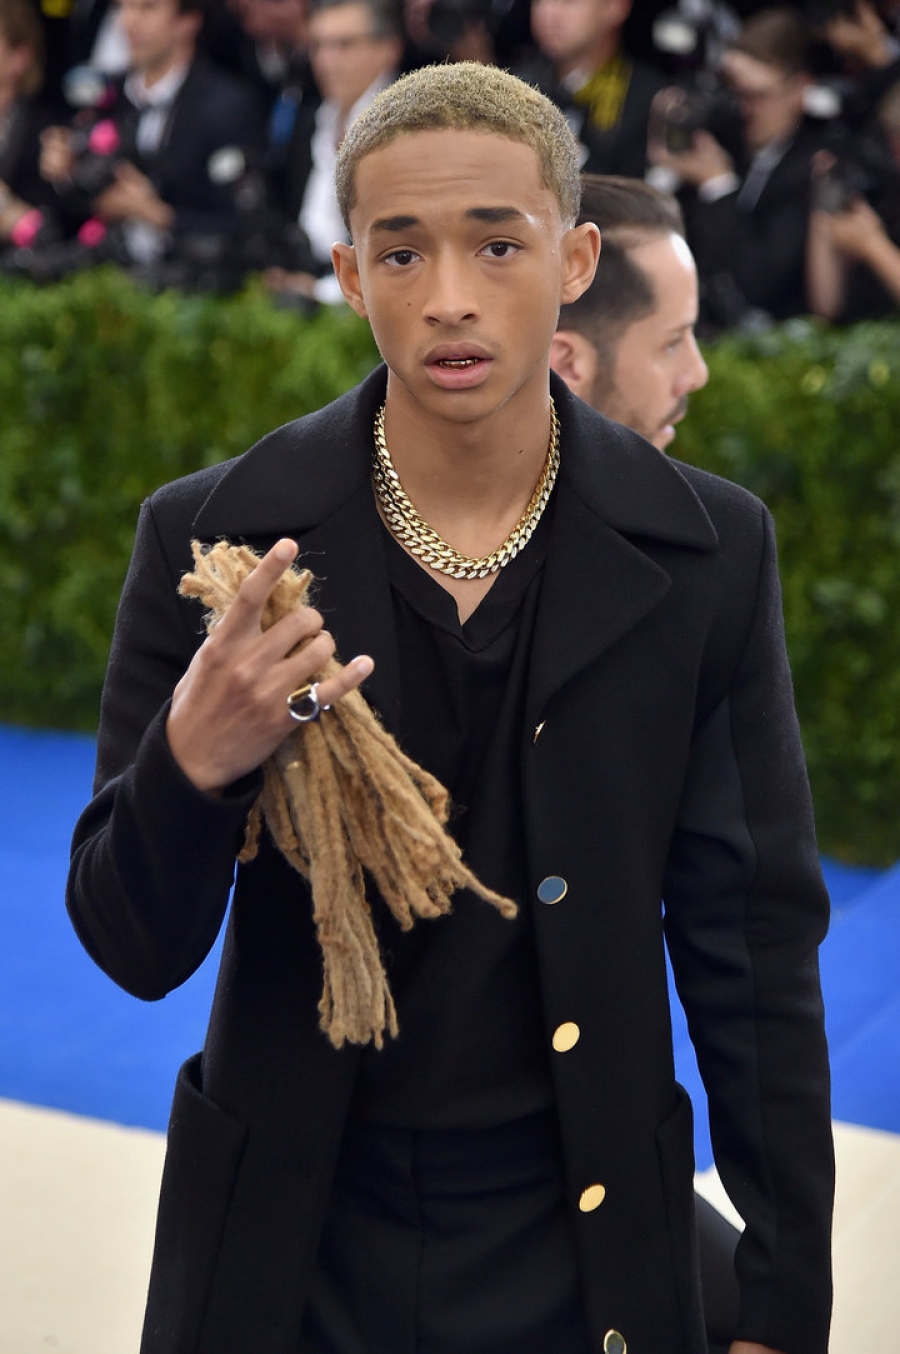 Jaden Smith Brought His Own Hair As An Accessory To The Met Gala Sac